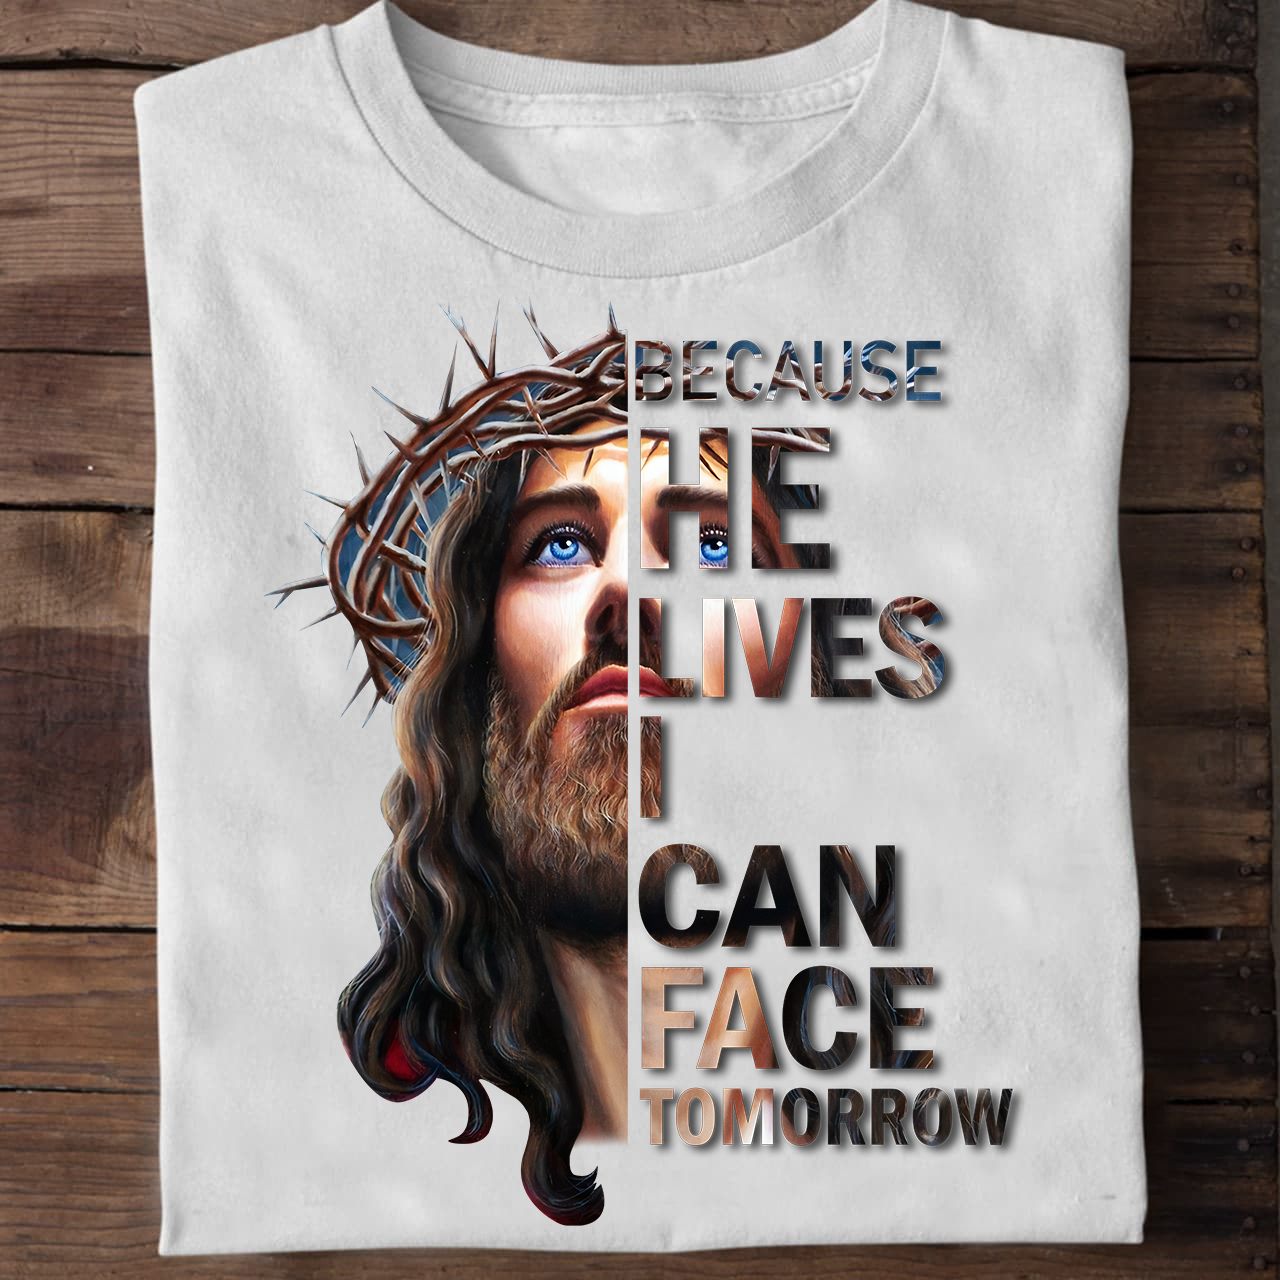 Because he lives I can face tomorrow - Jesus the god